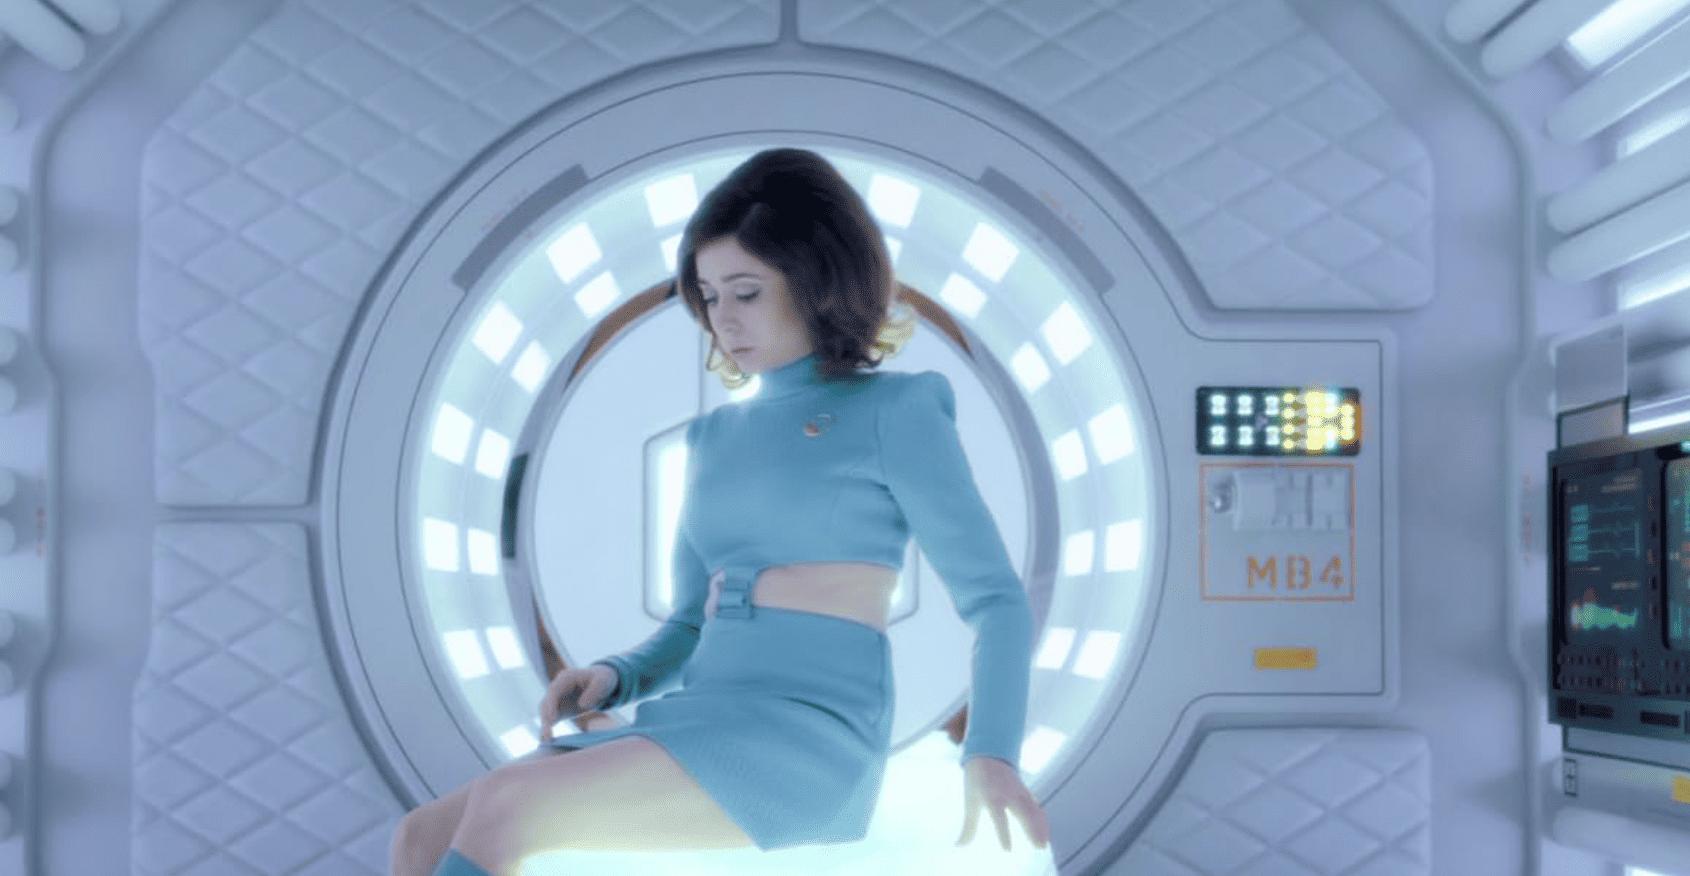 Cristin Milioti wears a light blue uniform, getting up from what appears to be an X-ray machine in this image from Zeppotron.